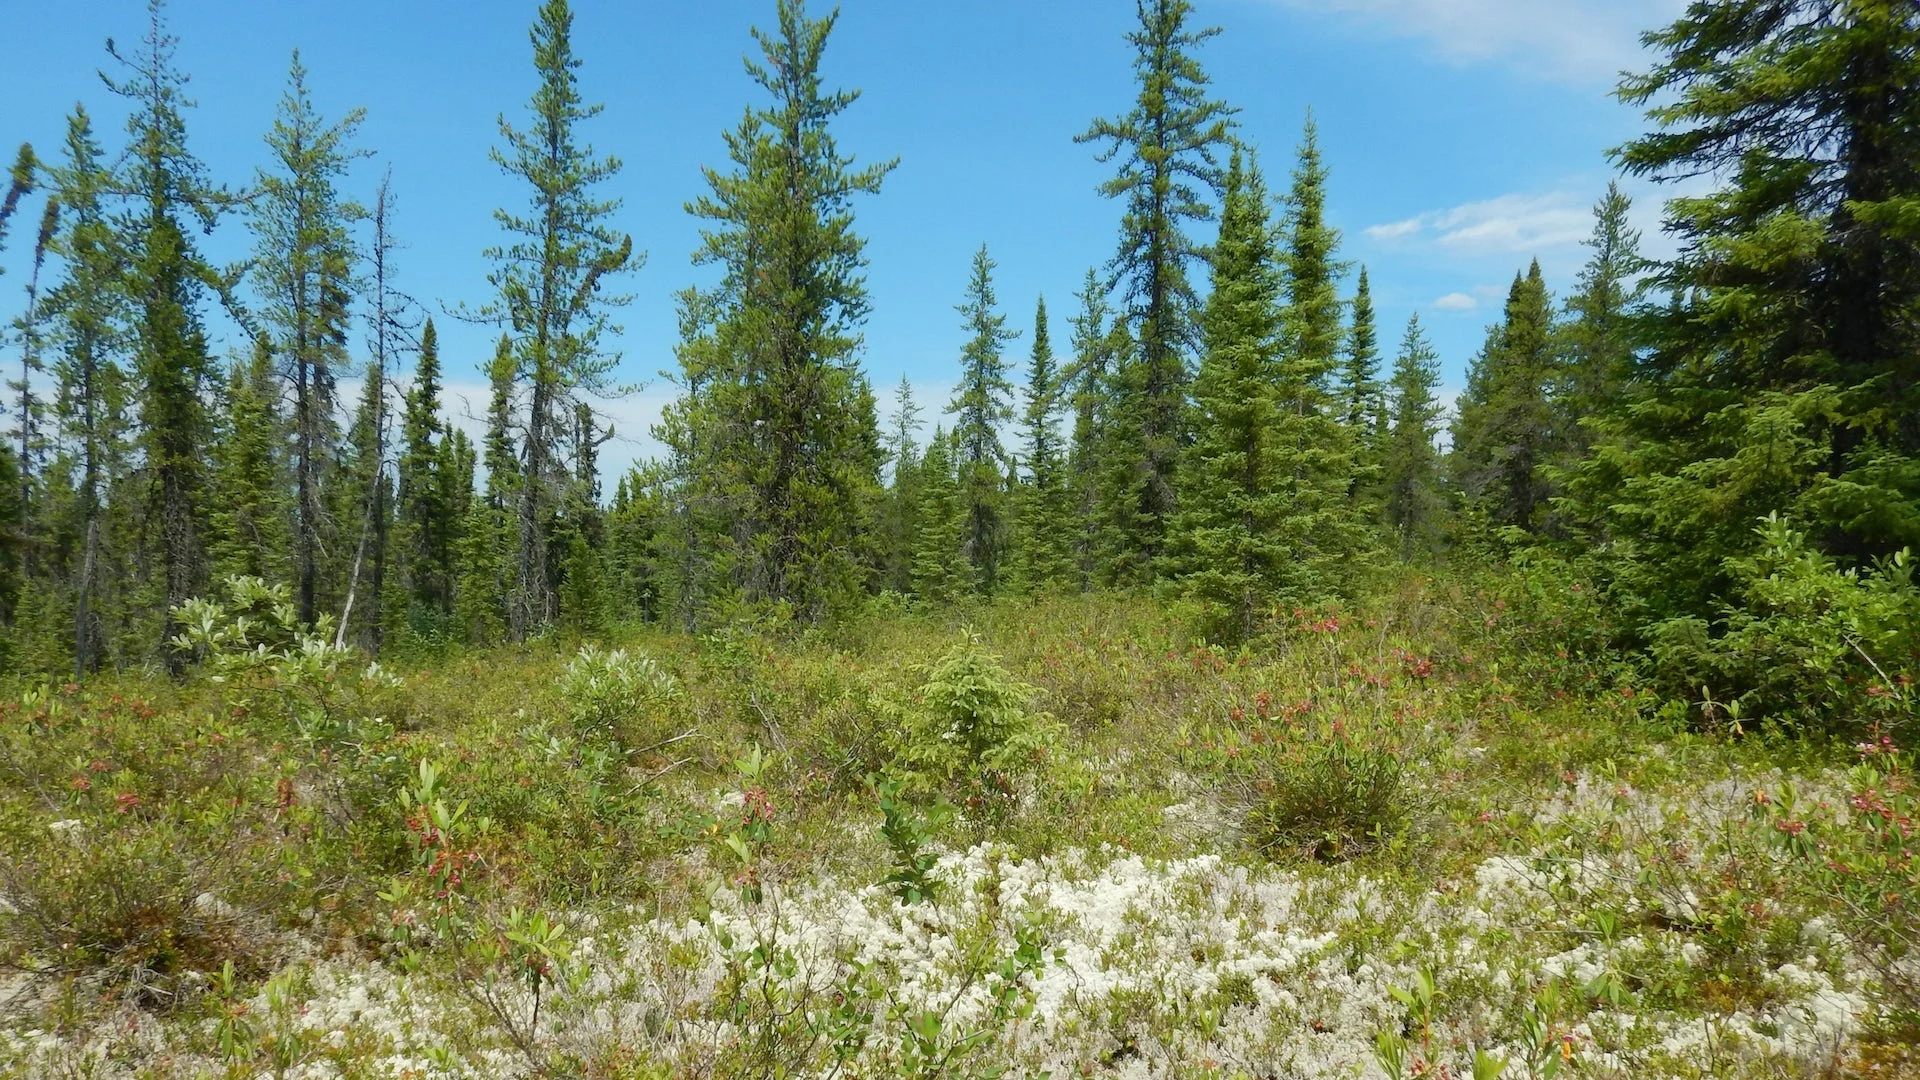 Can the boreal forest be used to concretely fight climate change?